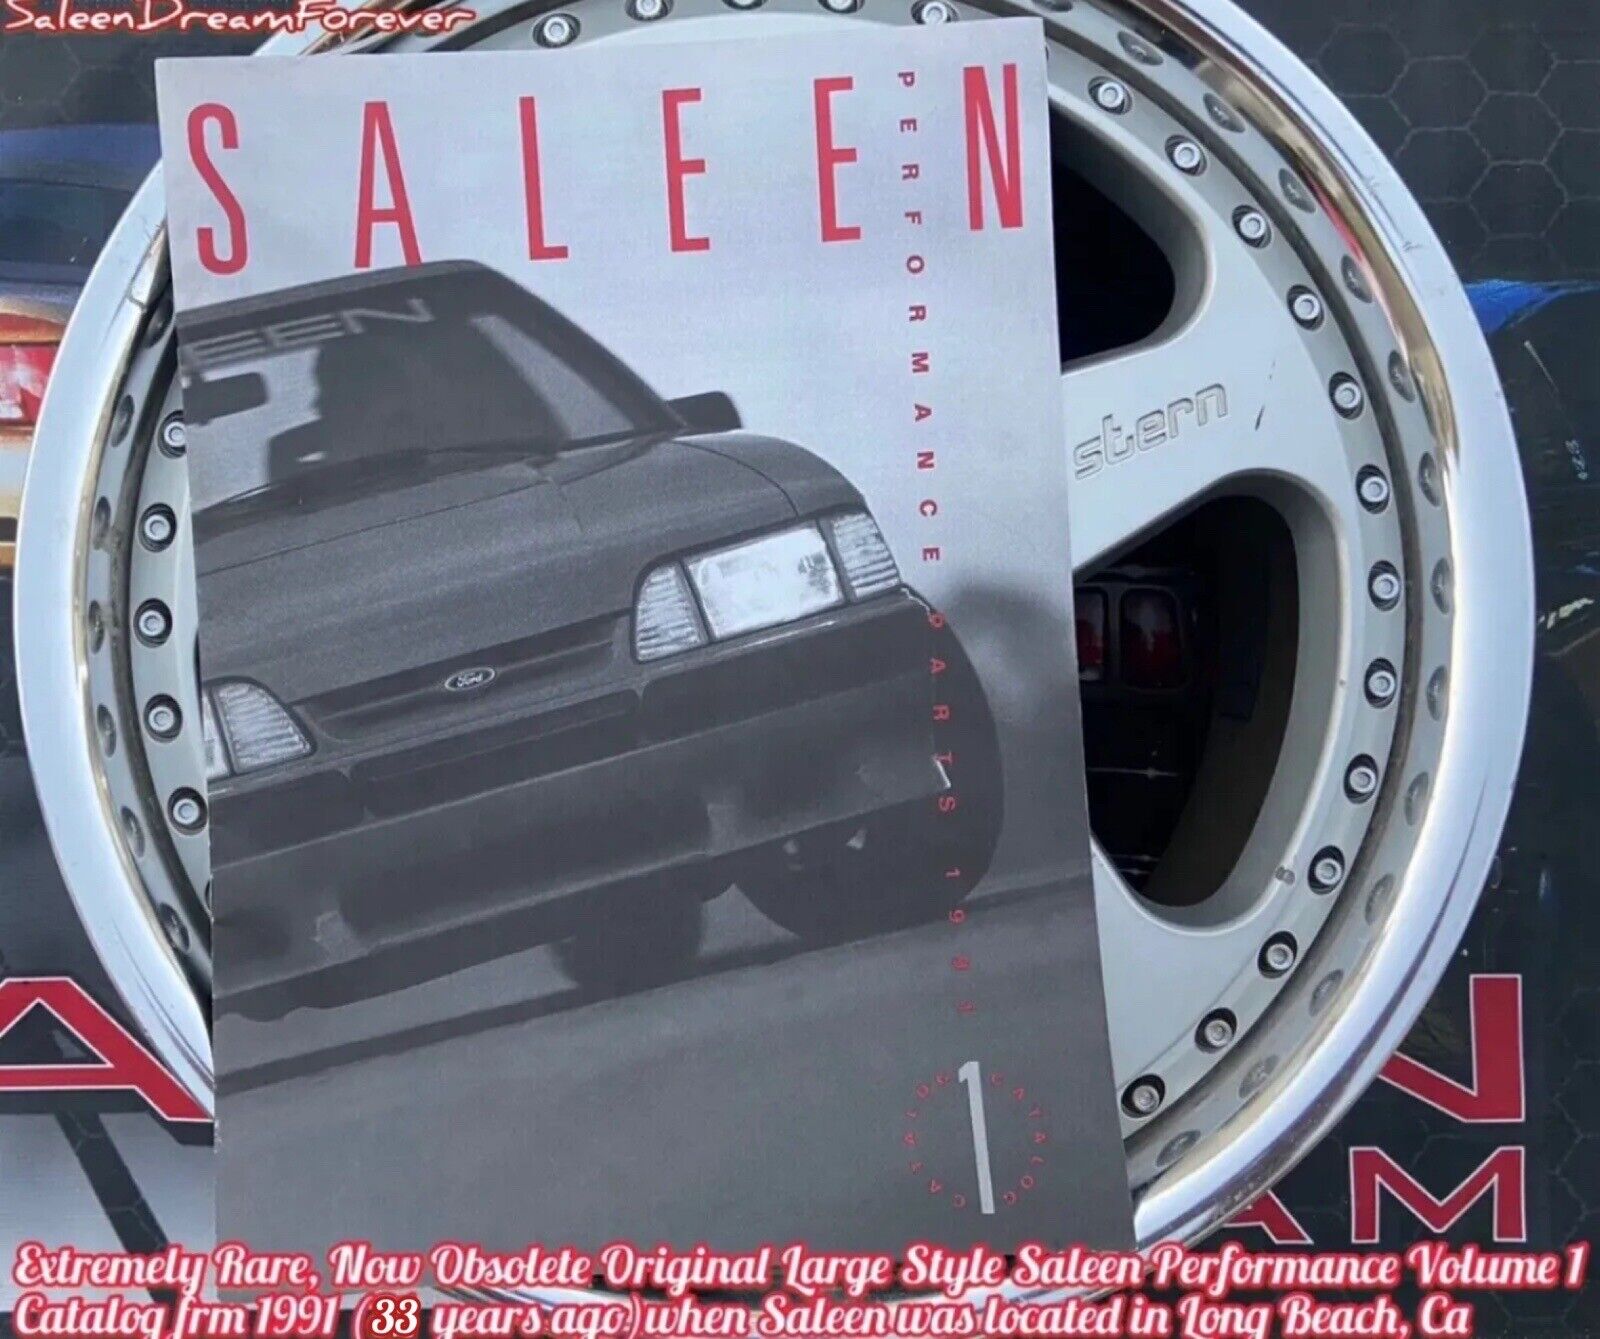 RARE SALEEN PERF VOL 1 PARTS CATALOG FRM 91 SSC SC FOX BODY MUSTANG 302 FORD GT